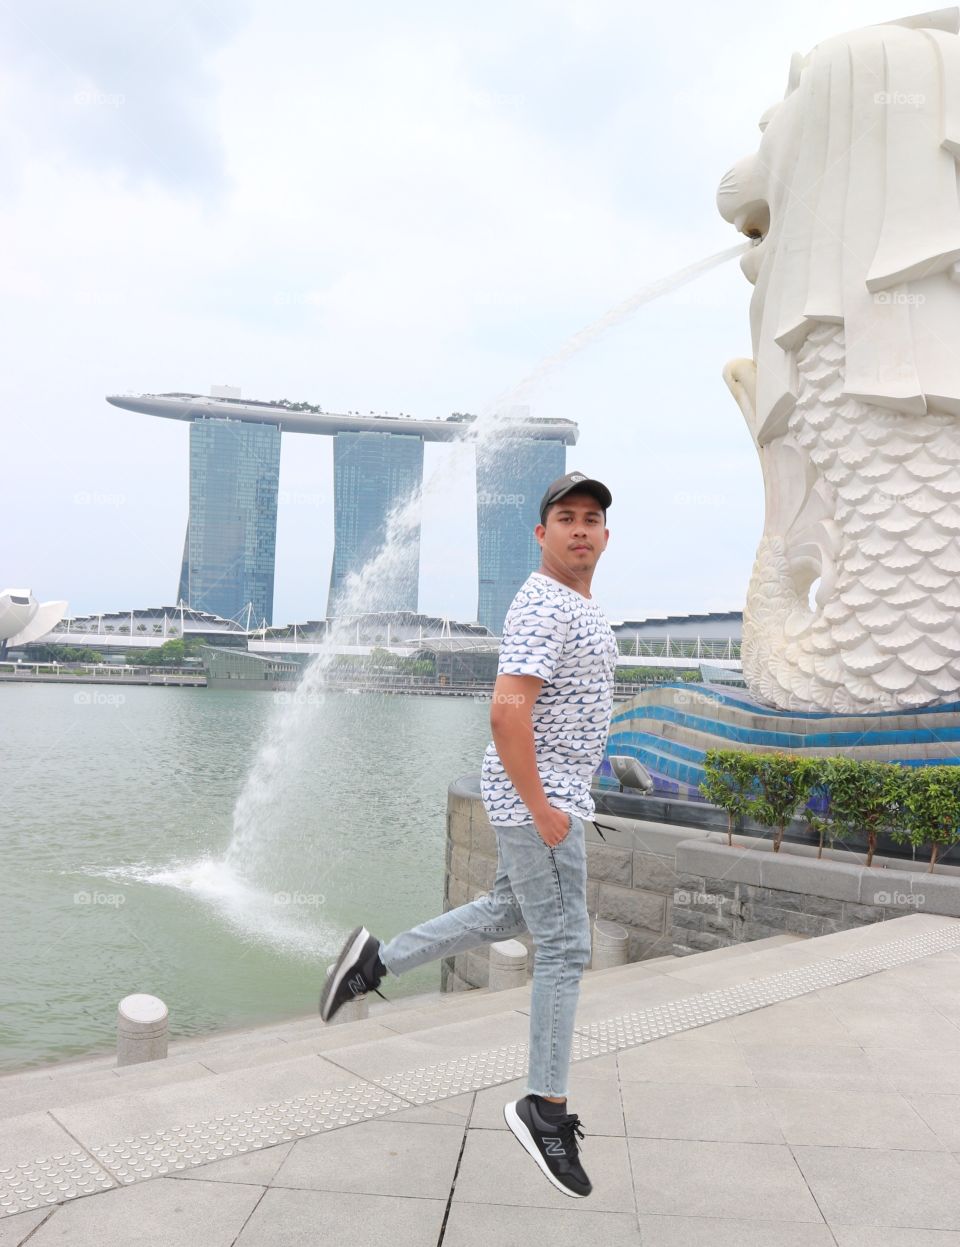 My Best Jump-shot in Merlion

Please buy my best jump-shot, Merlion and Marina Bay Sands at the back. 

Promoting Singapore Tourism 🦁🦁🦁